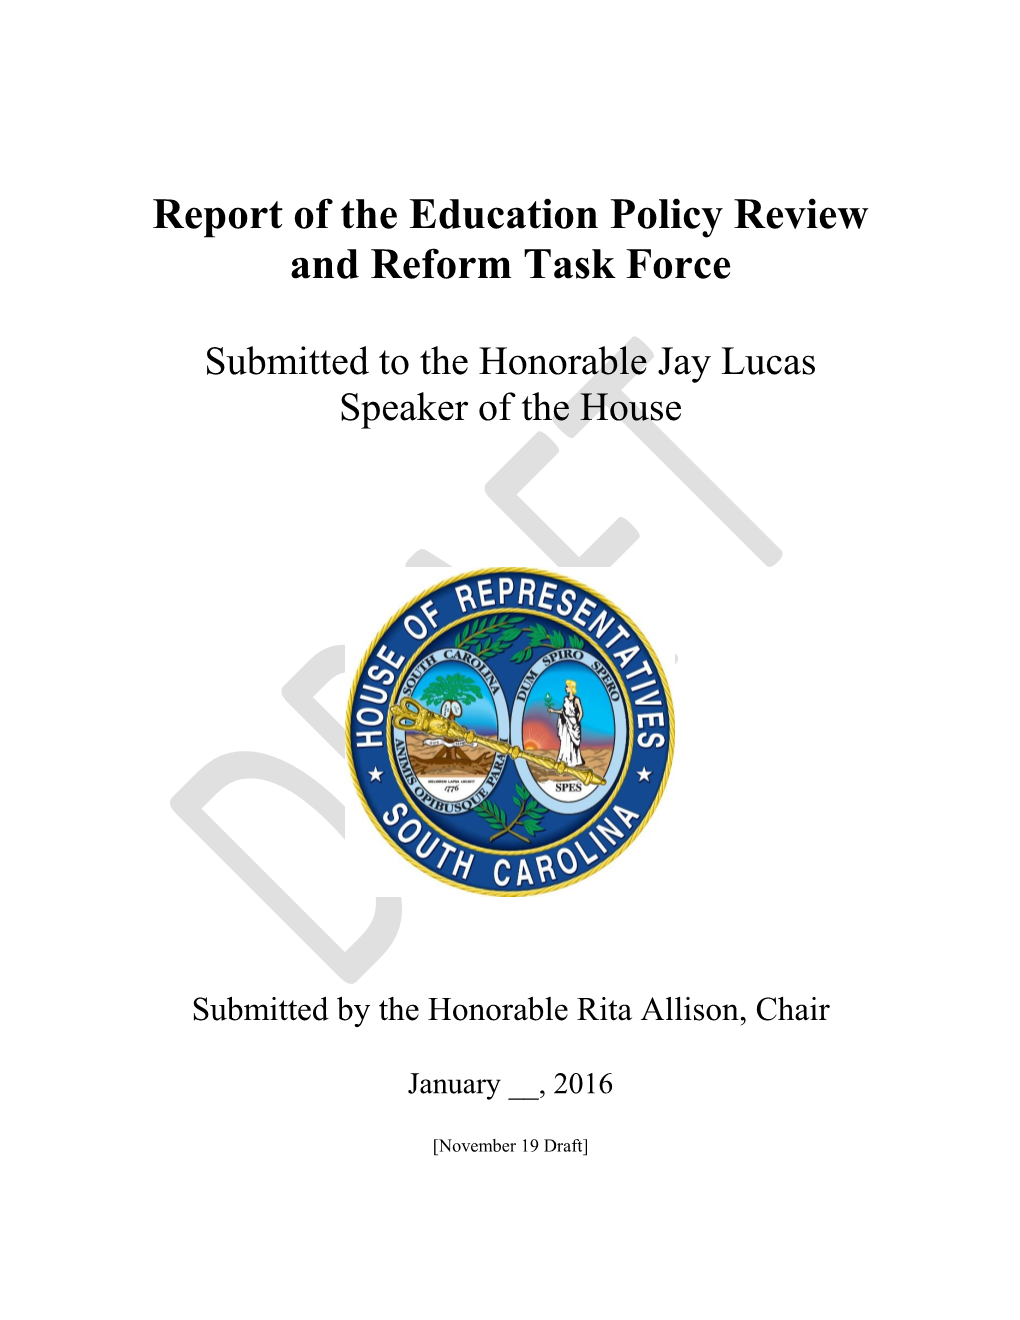 Report of the Education Policy Review and Reform Task Force